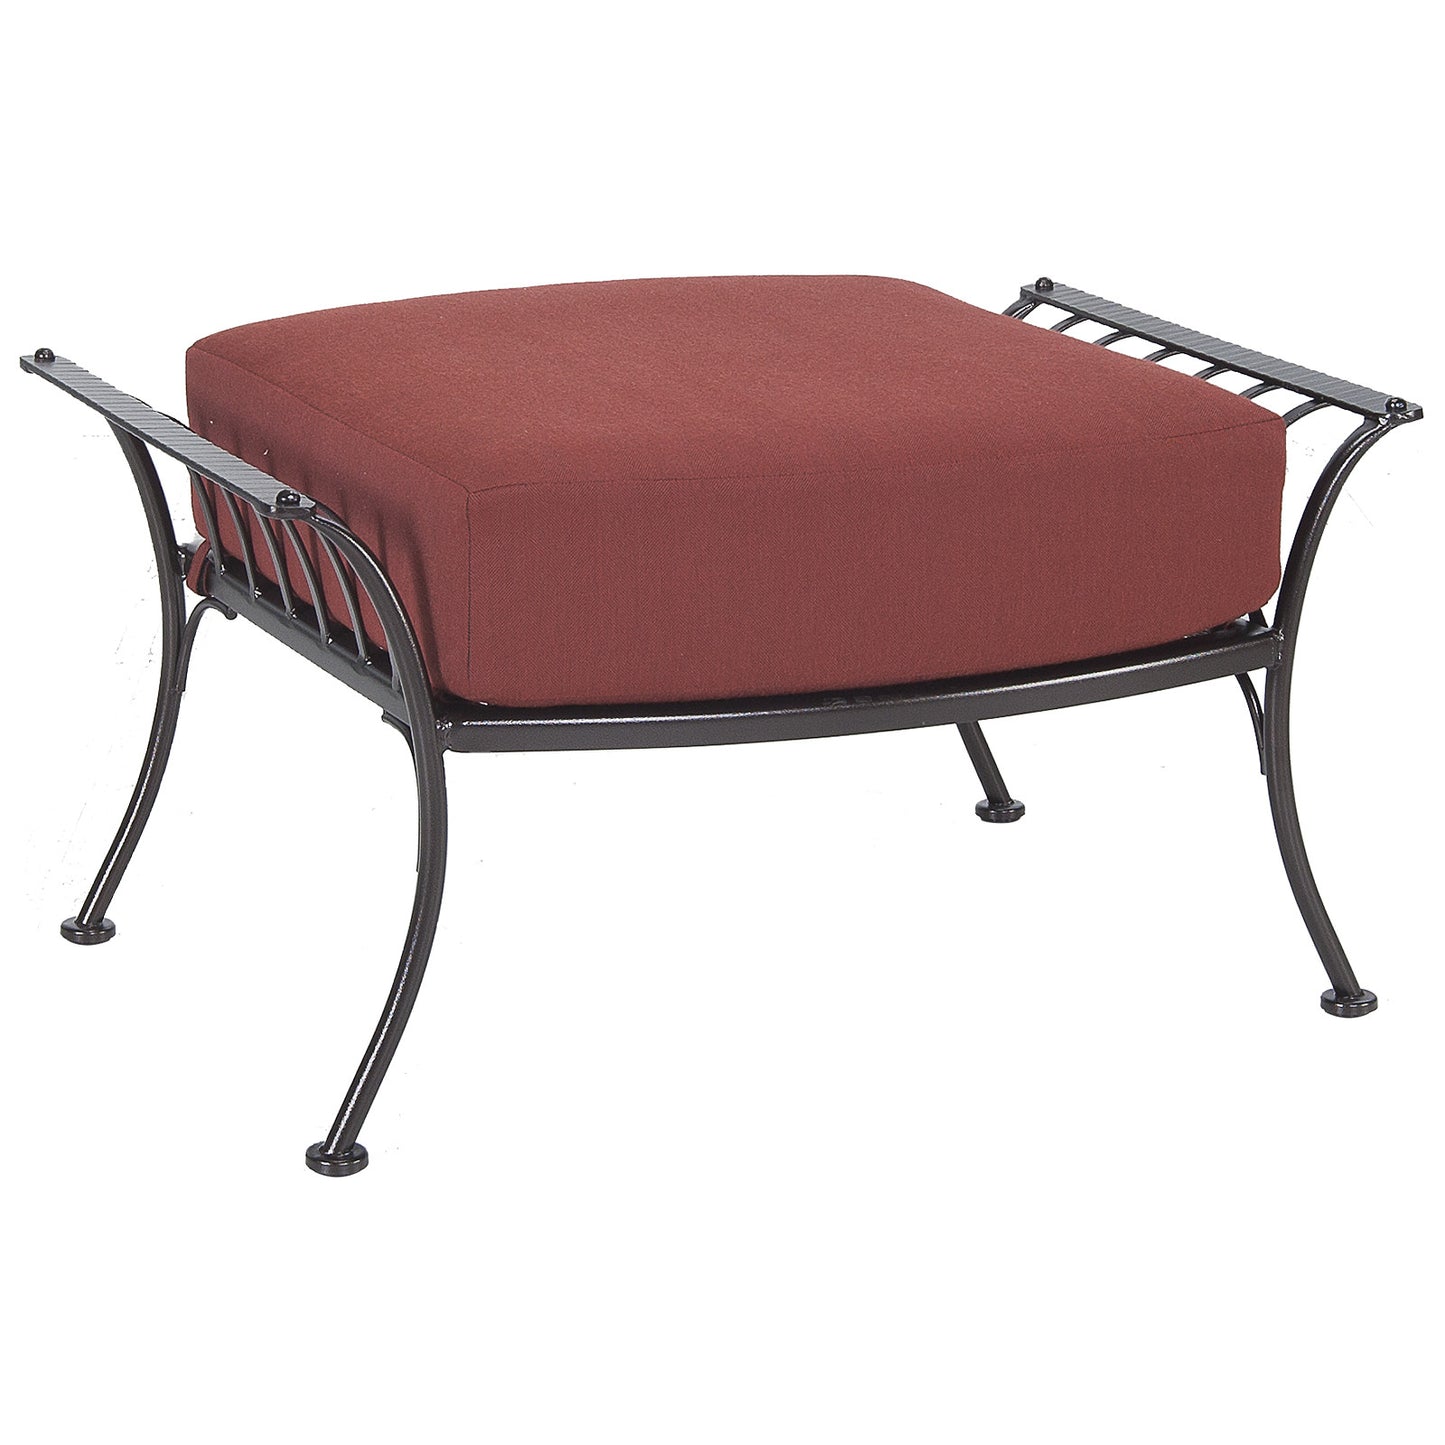 O.W. Lee Monterra Outdoor Patio Ottoman is available at Jacobs Custom Living.